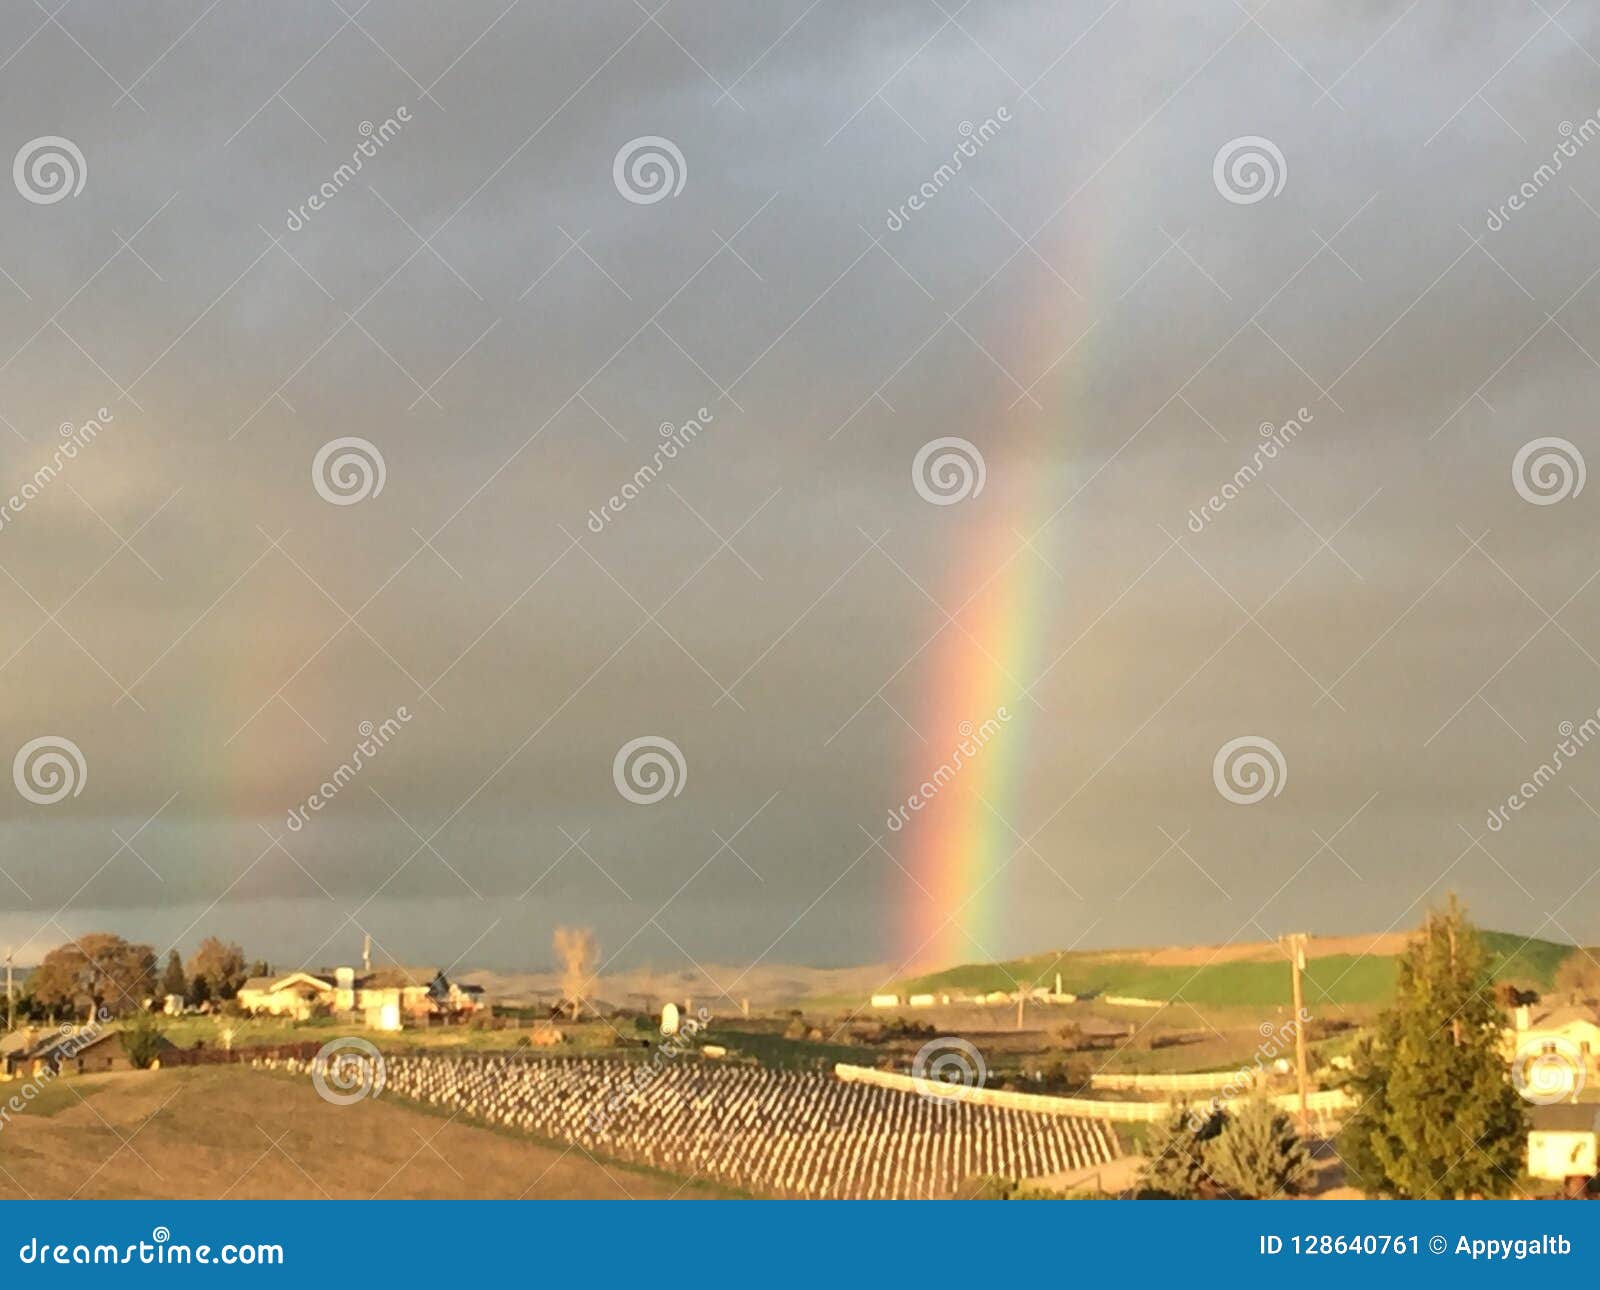 partial double rainbow with green grass and young vineyard - paso robles, california